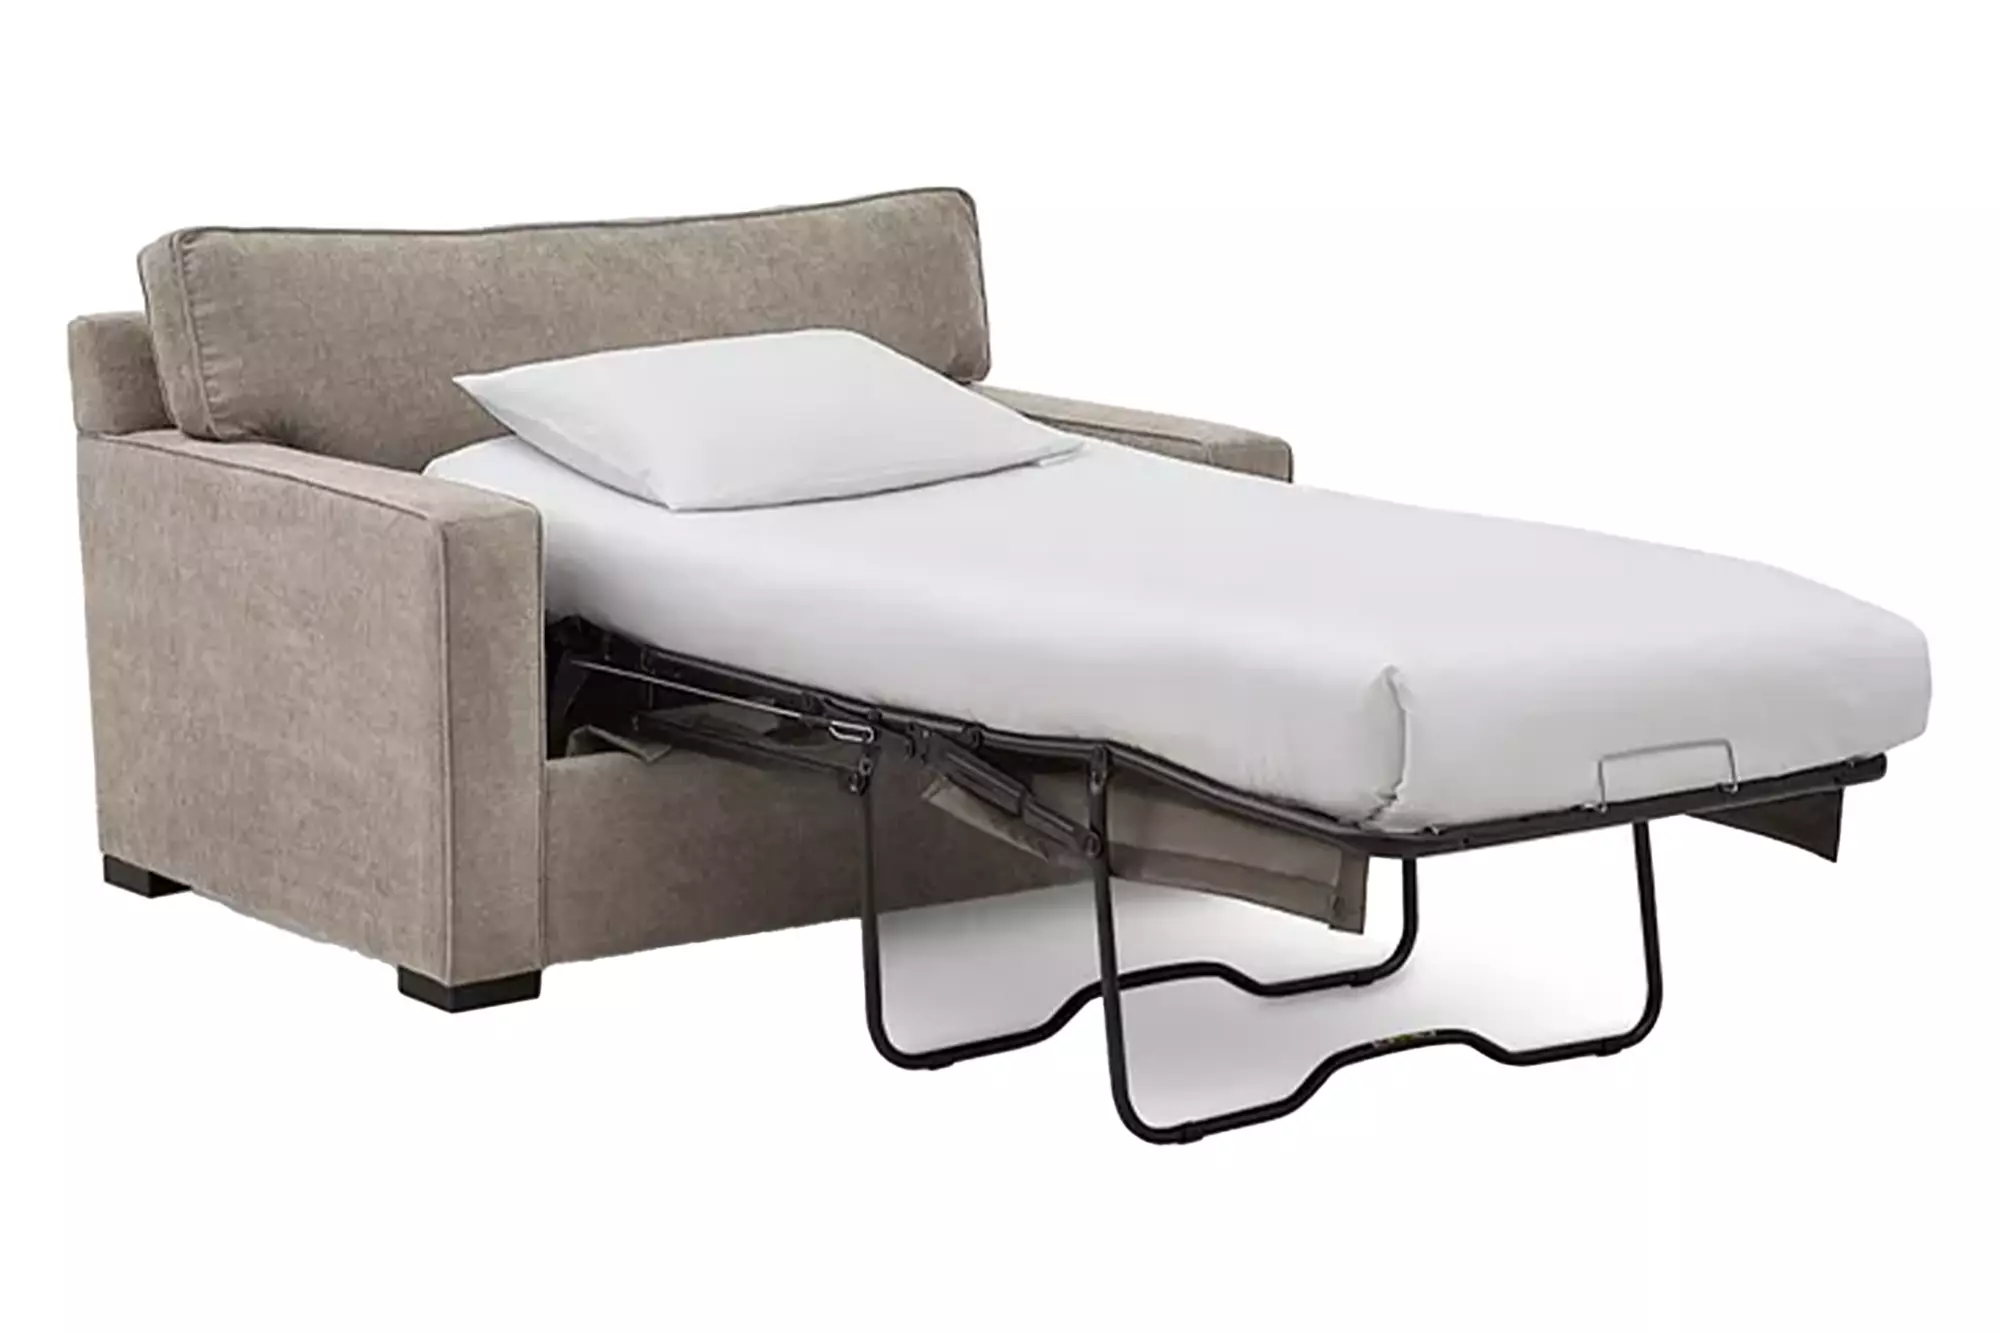 Radley 54" Fabric Chair Bed